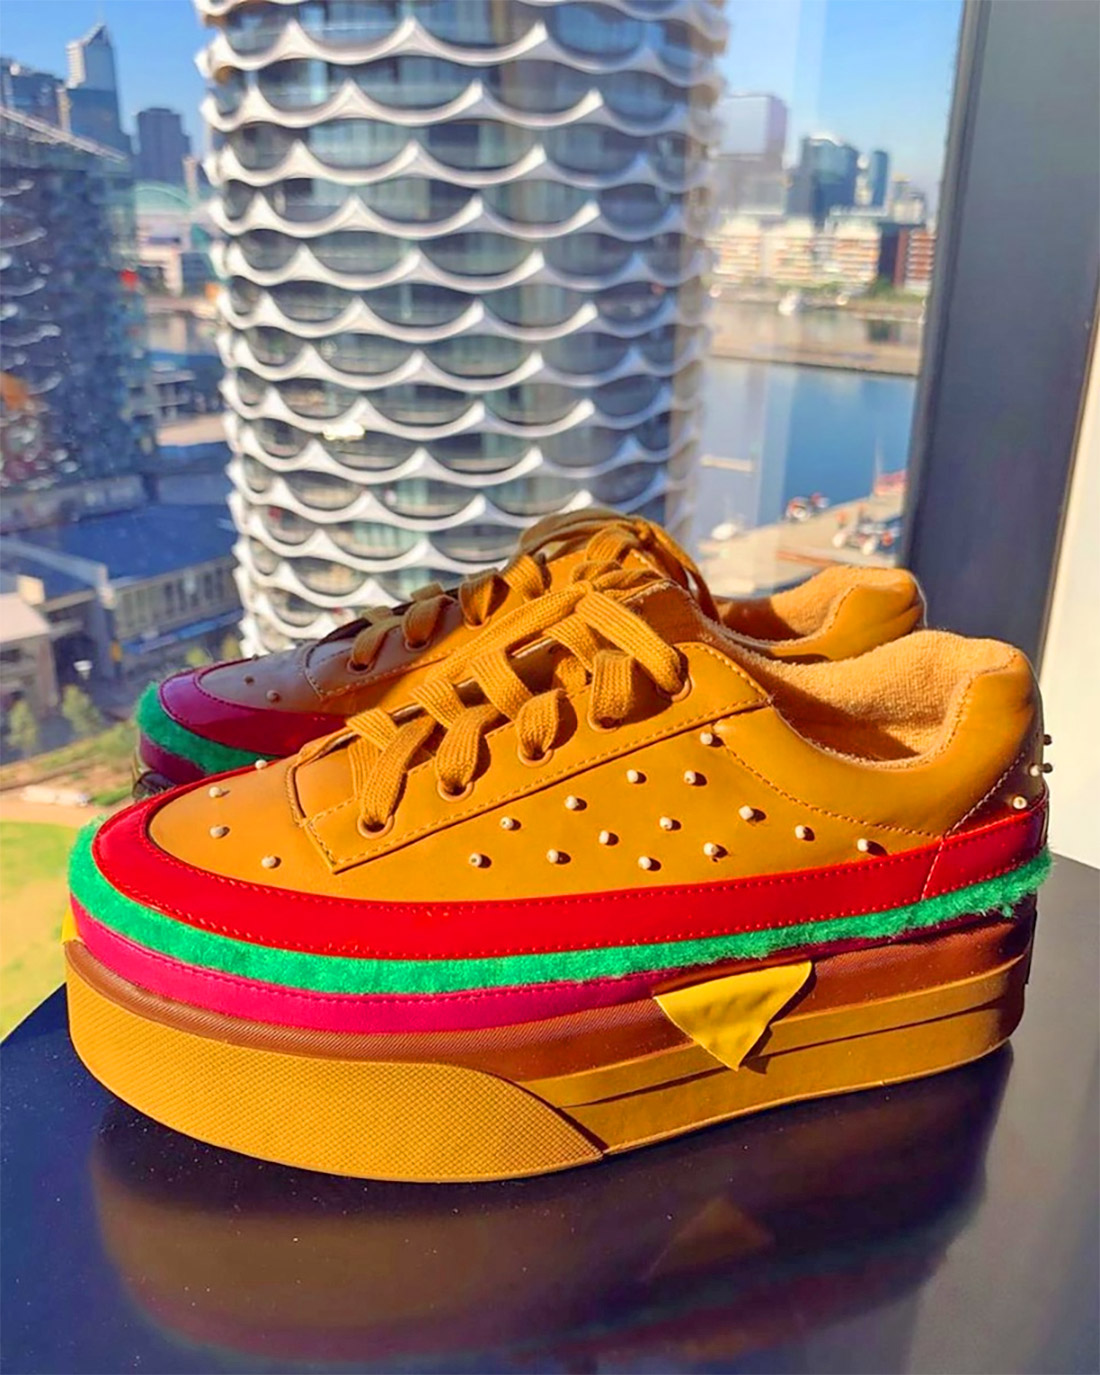 Cheeseburger Shoes - EXTRA CHEESE PLZ BURGER SNEAKERS